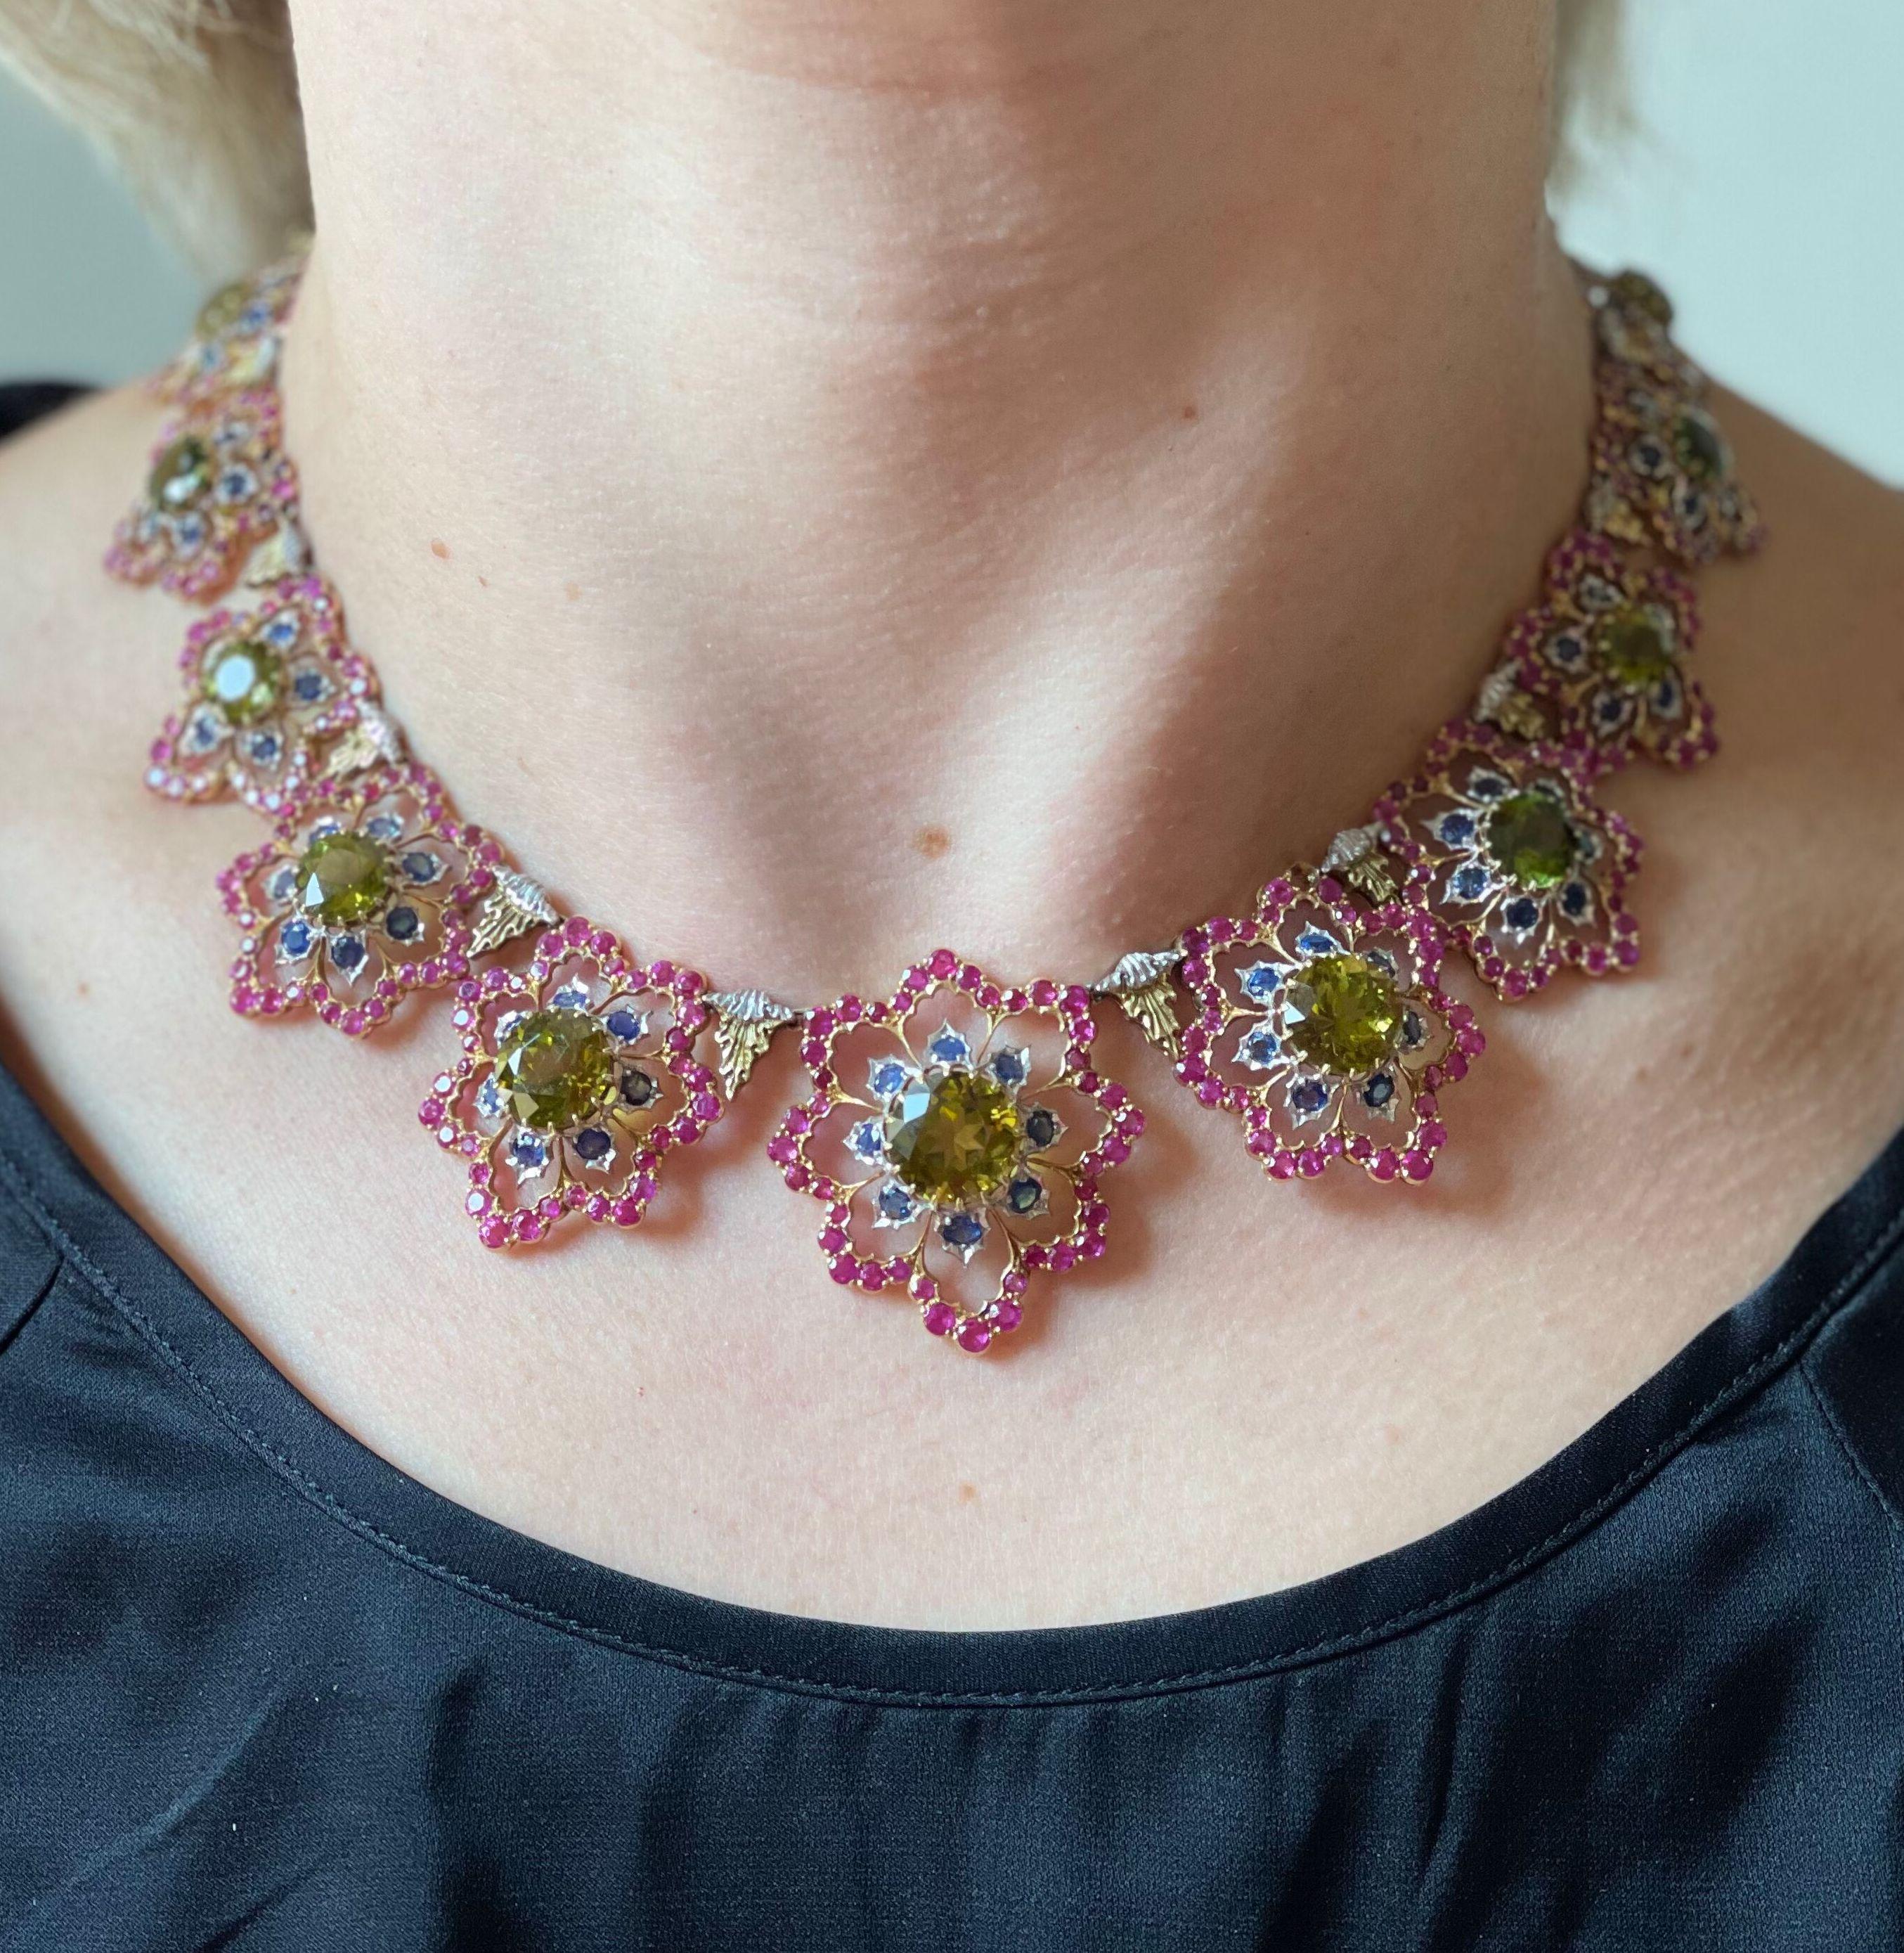 Important and impressive 18k gold necklace by Buccellati, adorned with vibrant rubies, blue sapphires and deep yellowish green peridots. The necklace is 16